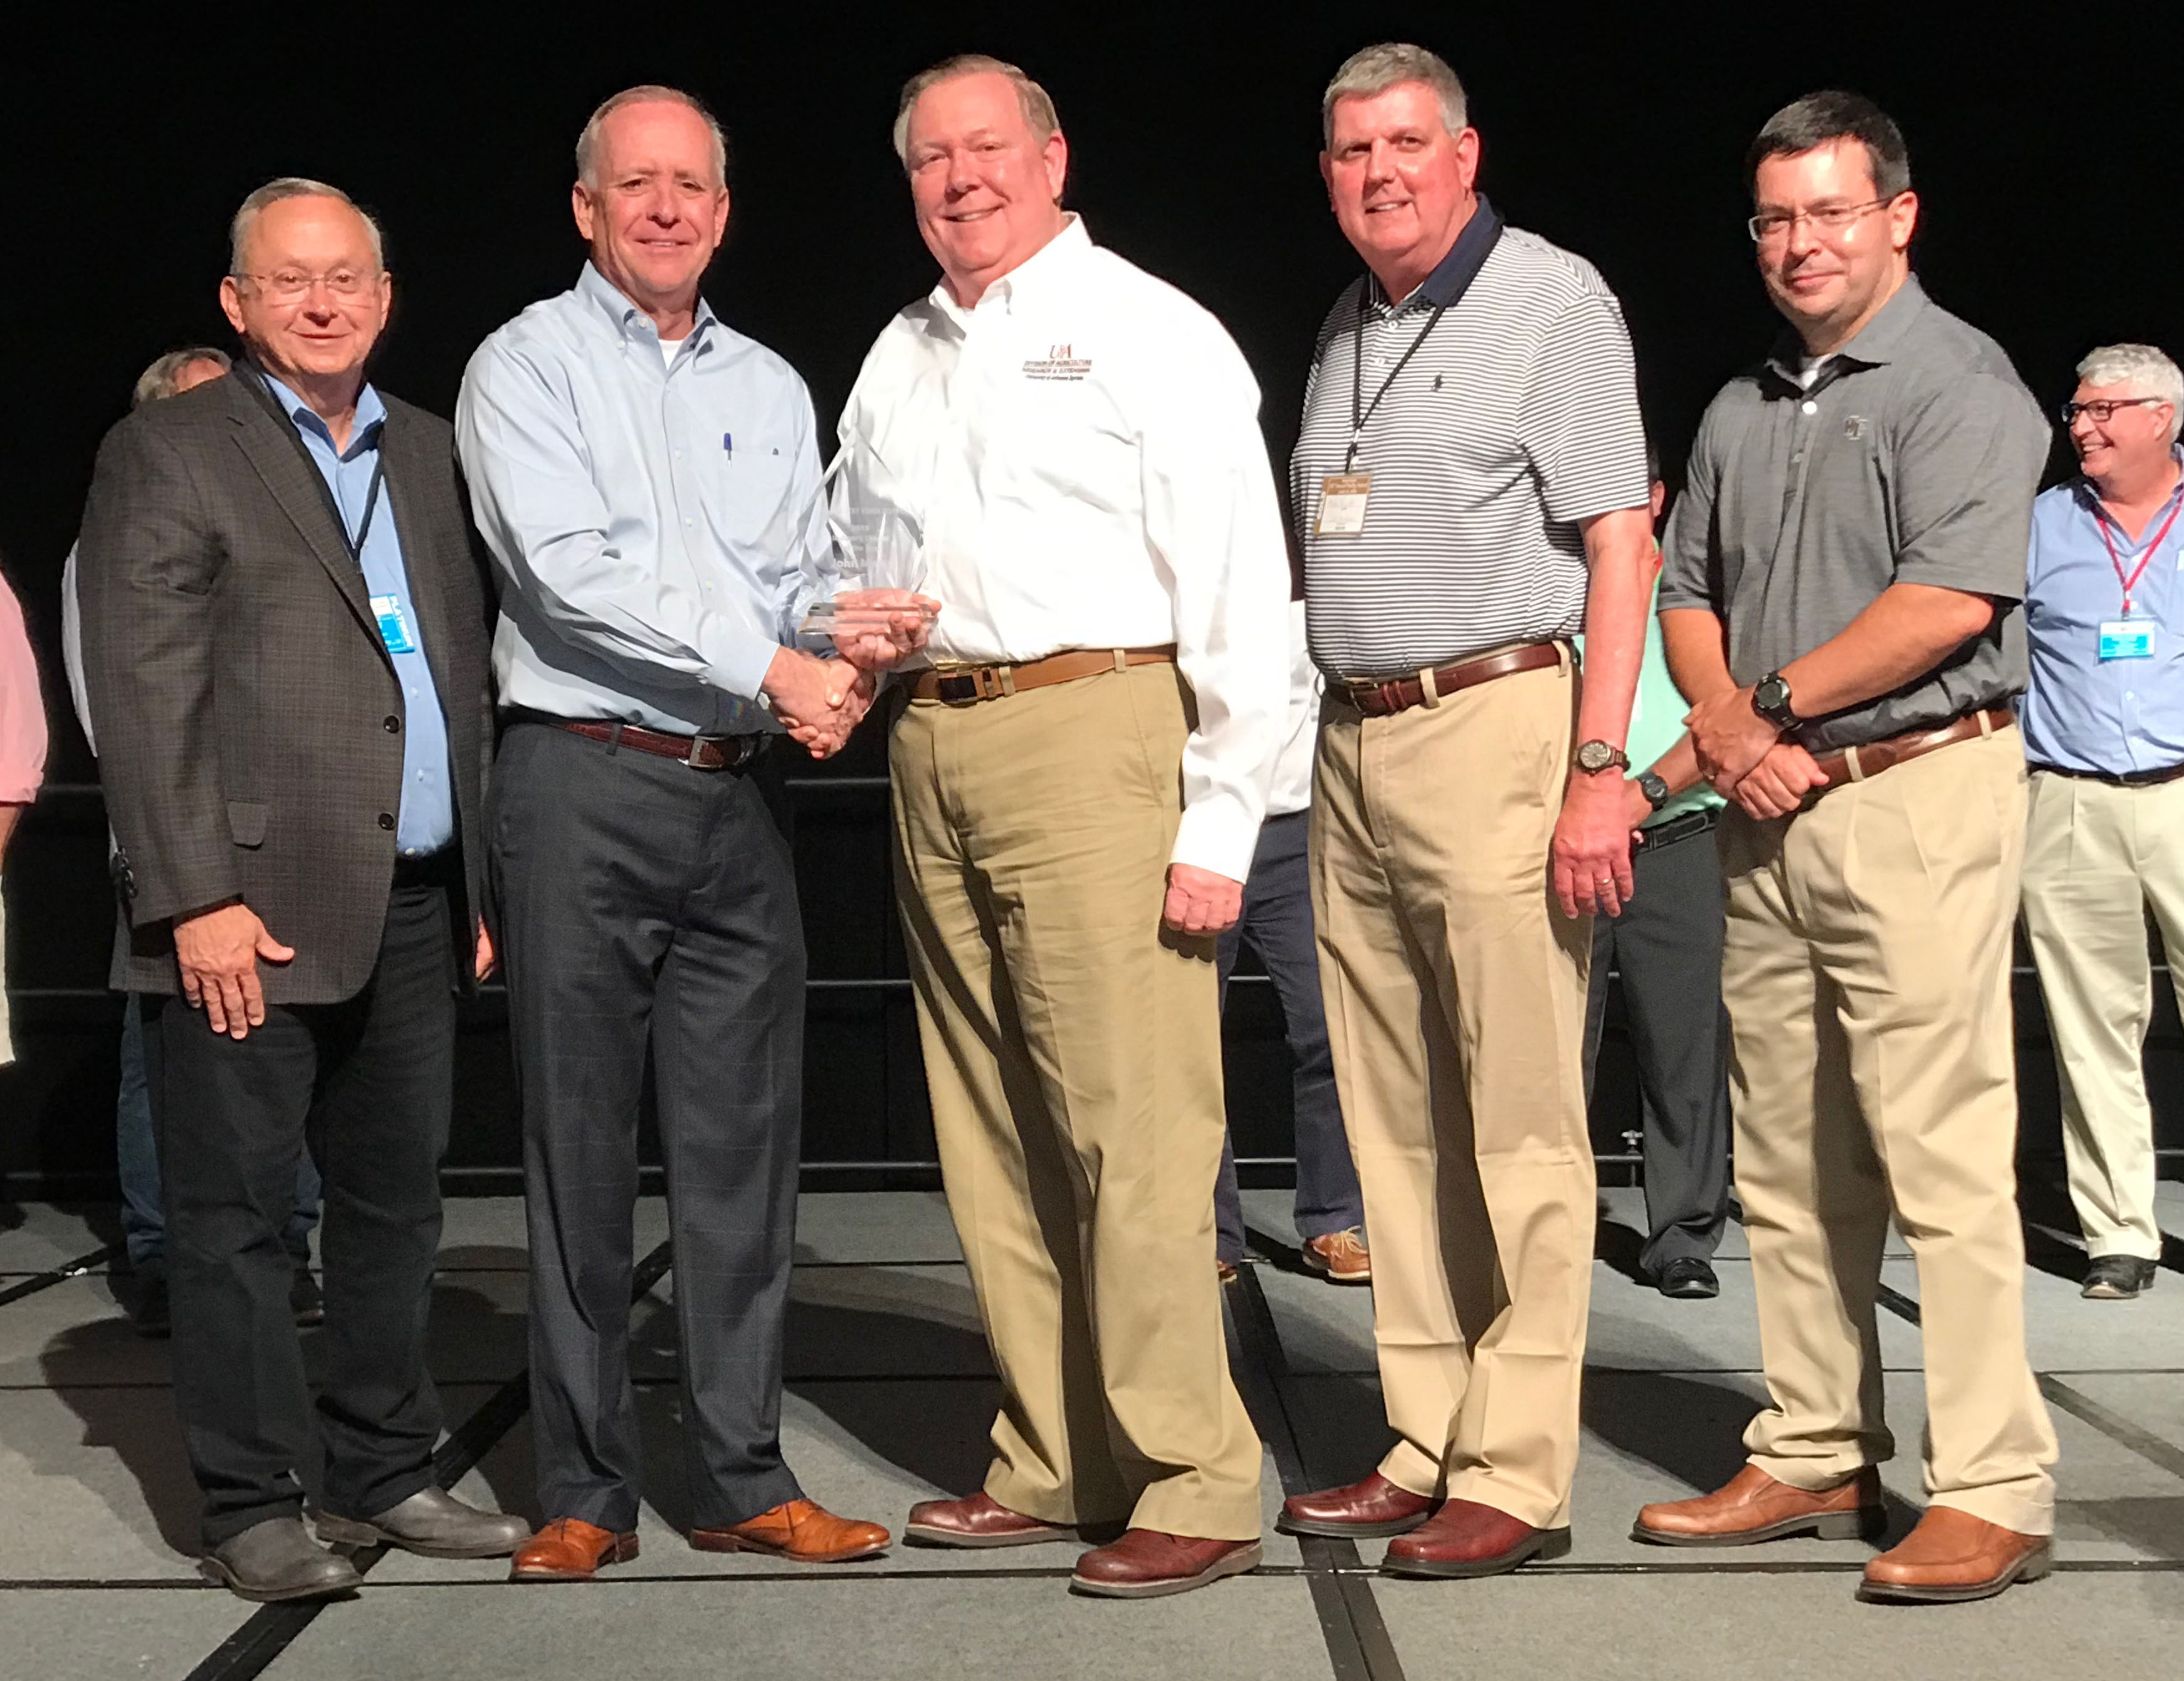 Marvin Childers, president of The Poultry Federation, shakes hands with John Marcy (white shirt), as Marcy was named the Industry Leader of the Year by TPF for 2019